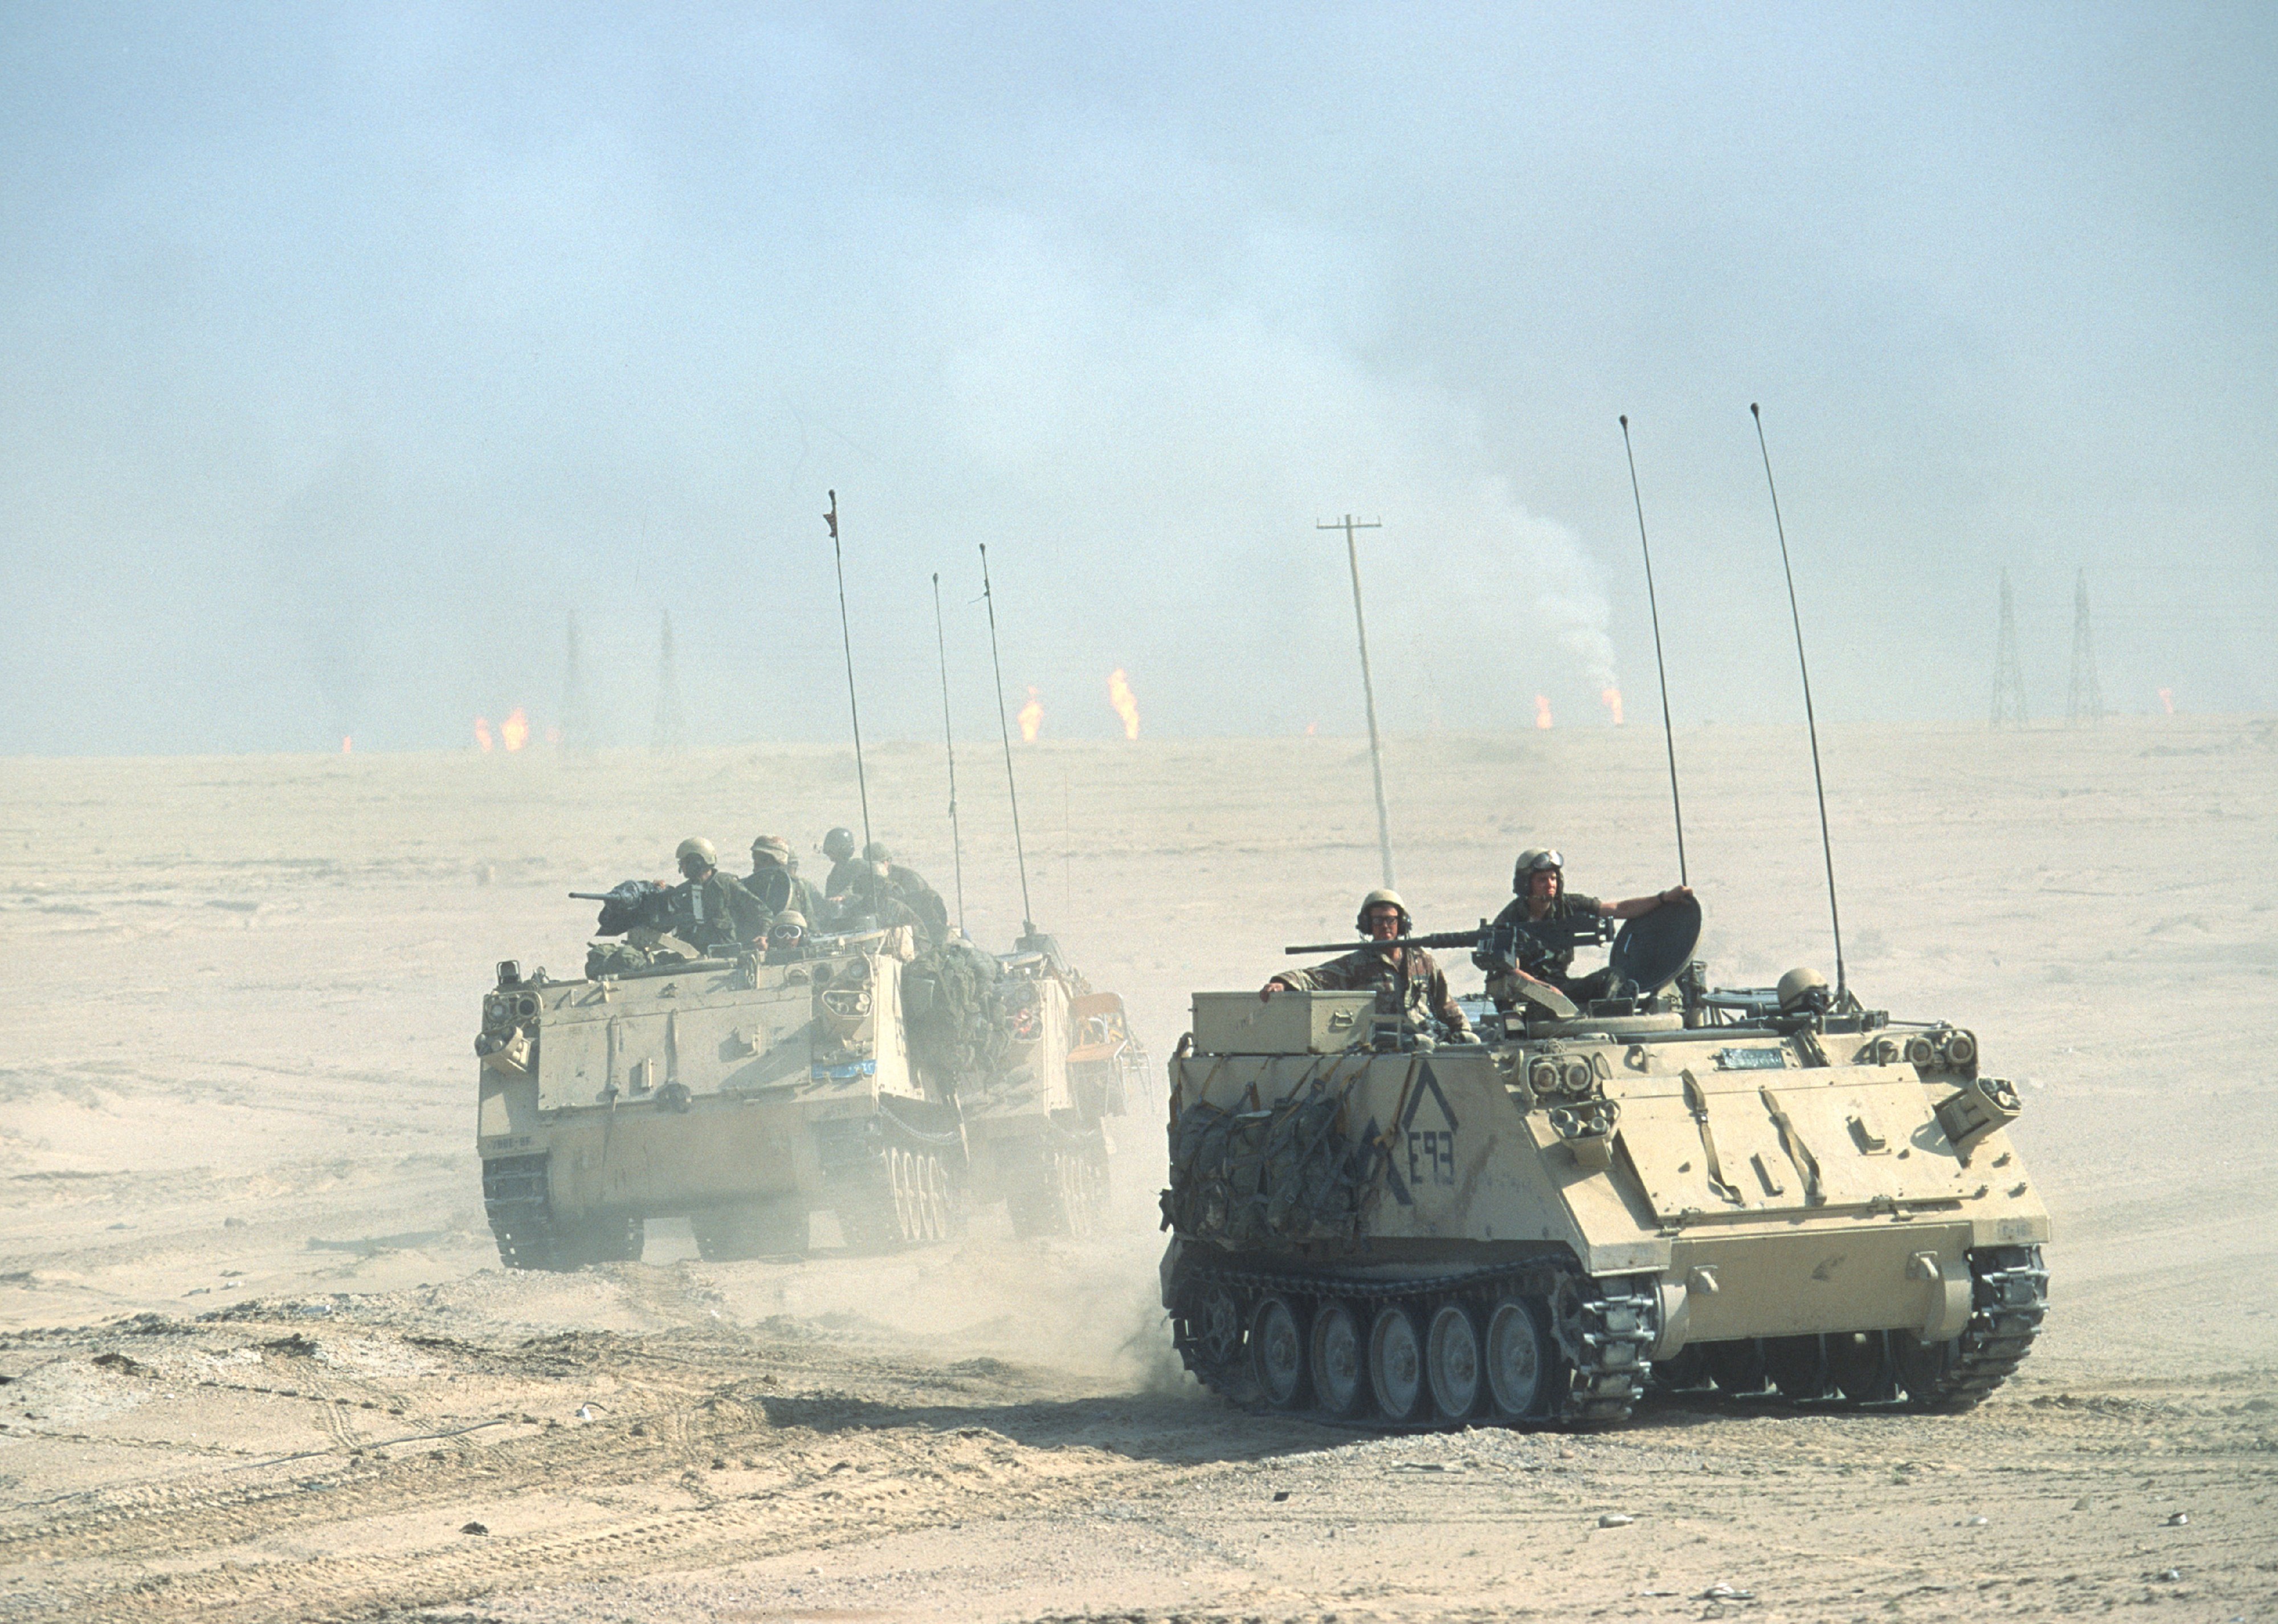 American M113 Armored Personnel Carriers as they cross the desert.